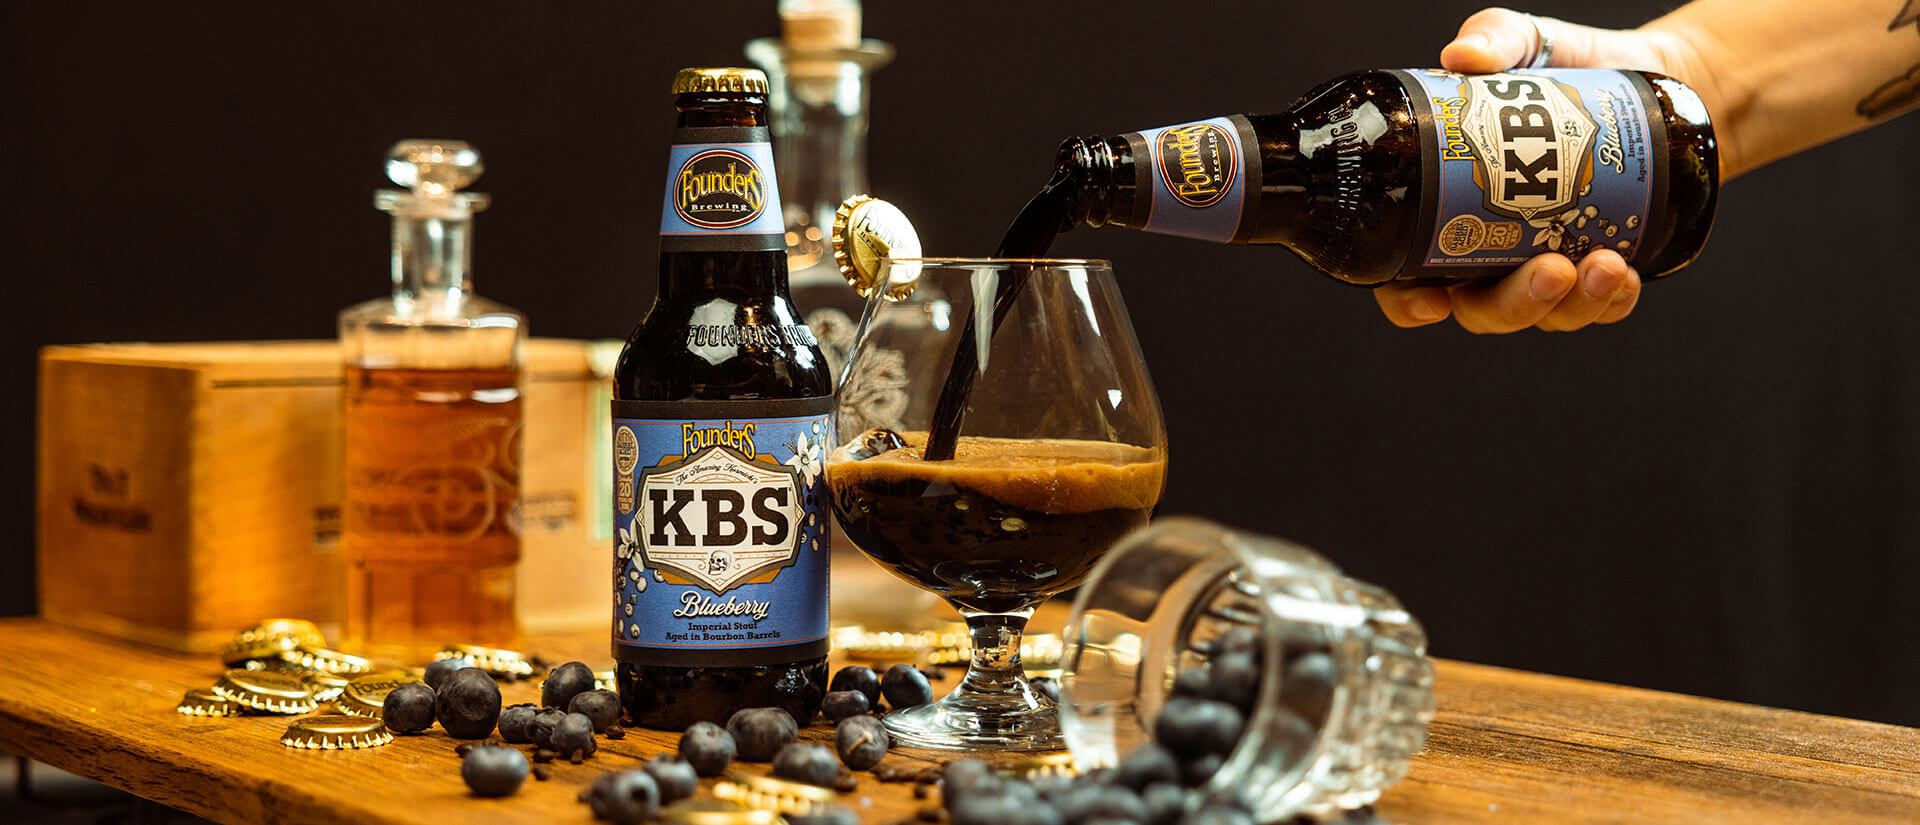 Bottle of KBS Blueberry and snifter pour on table with blueberries and bottle caps